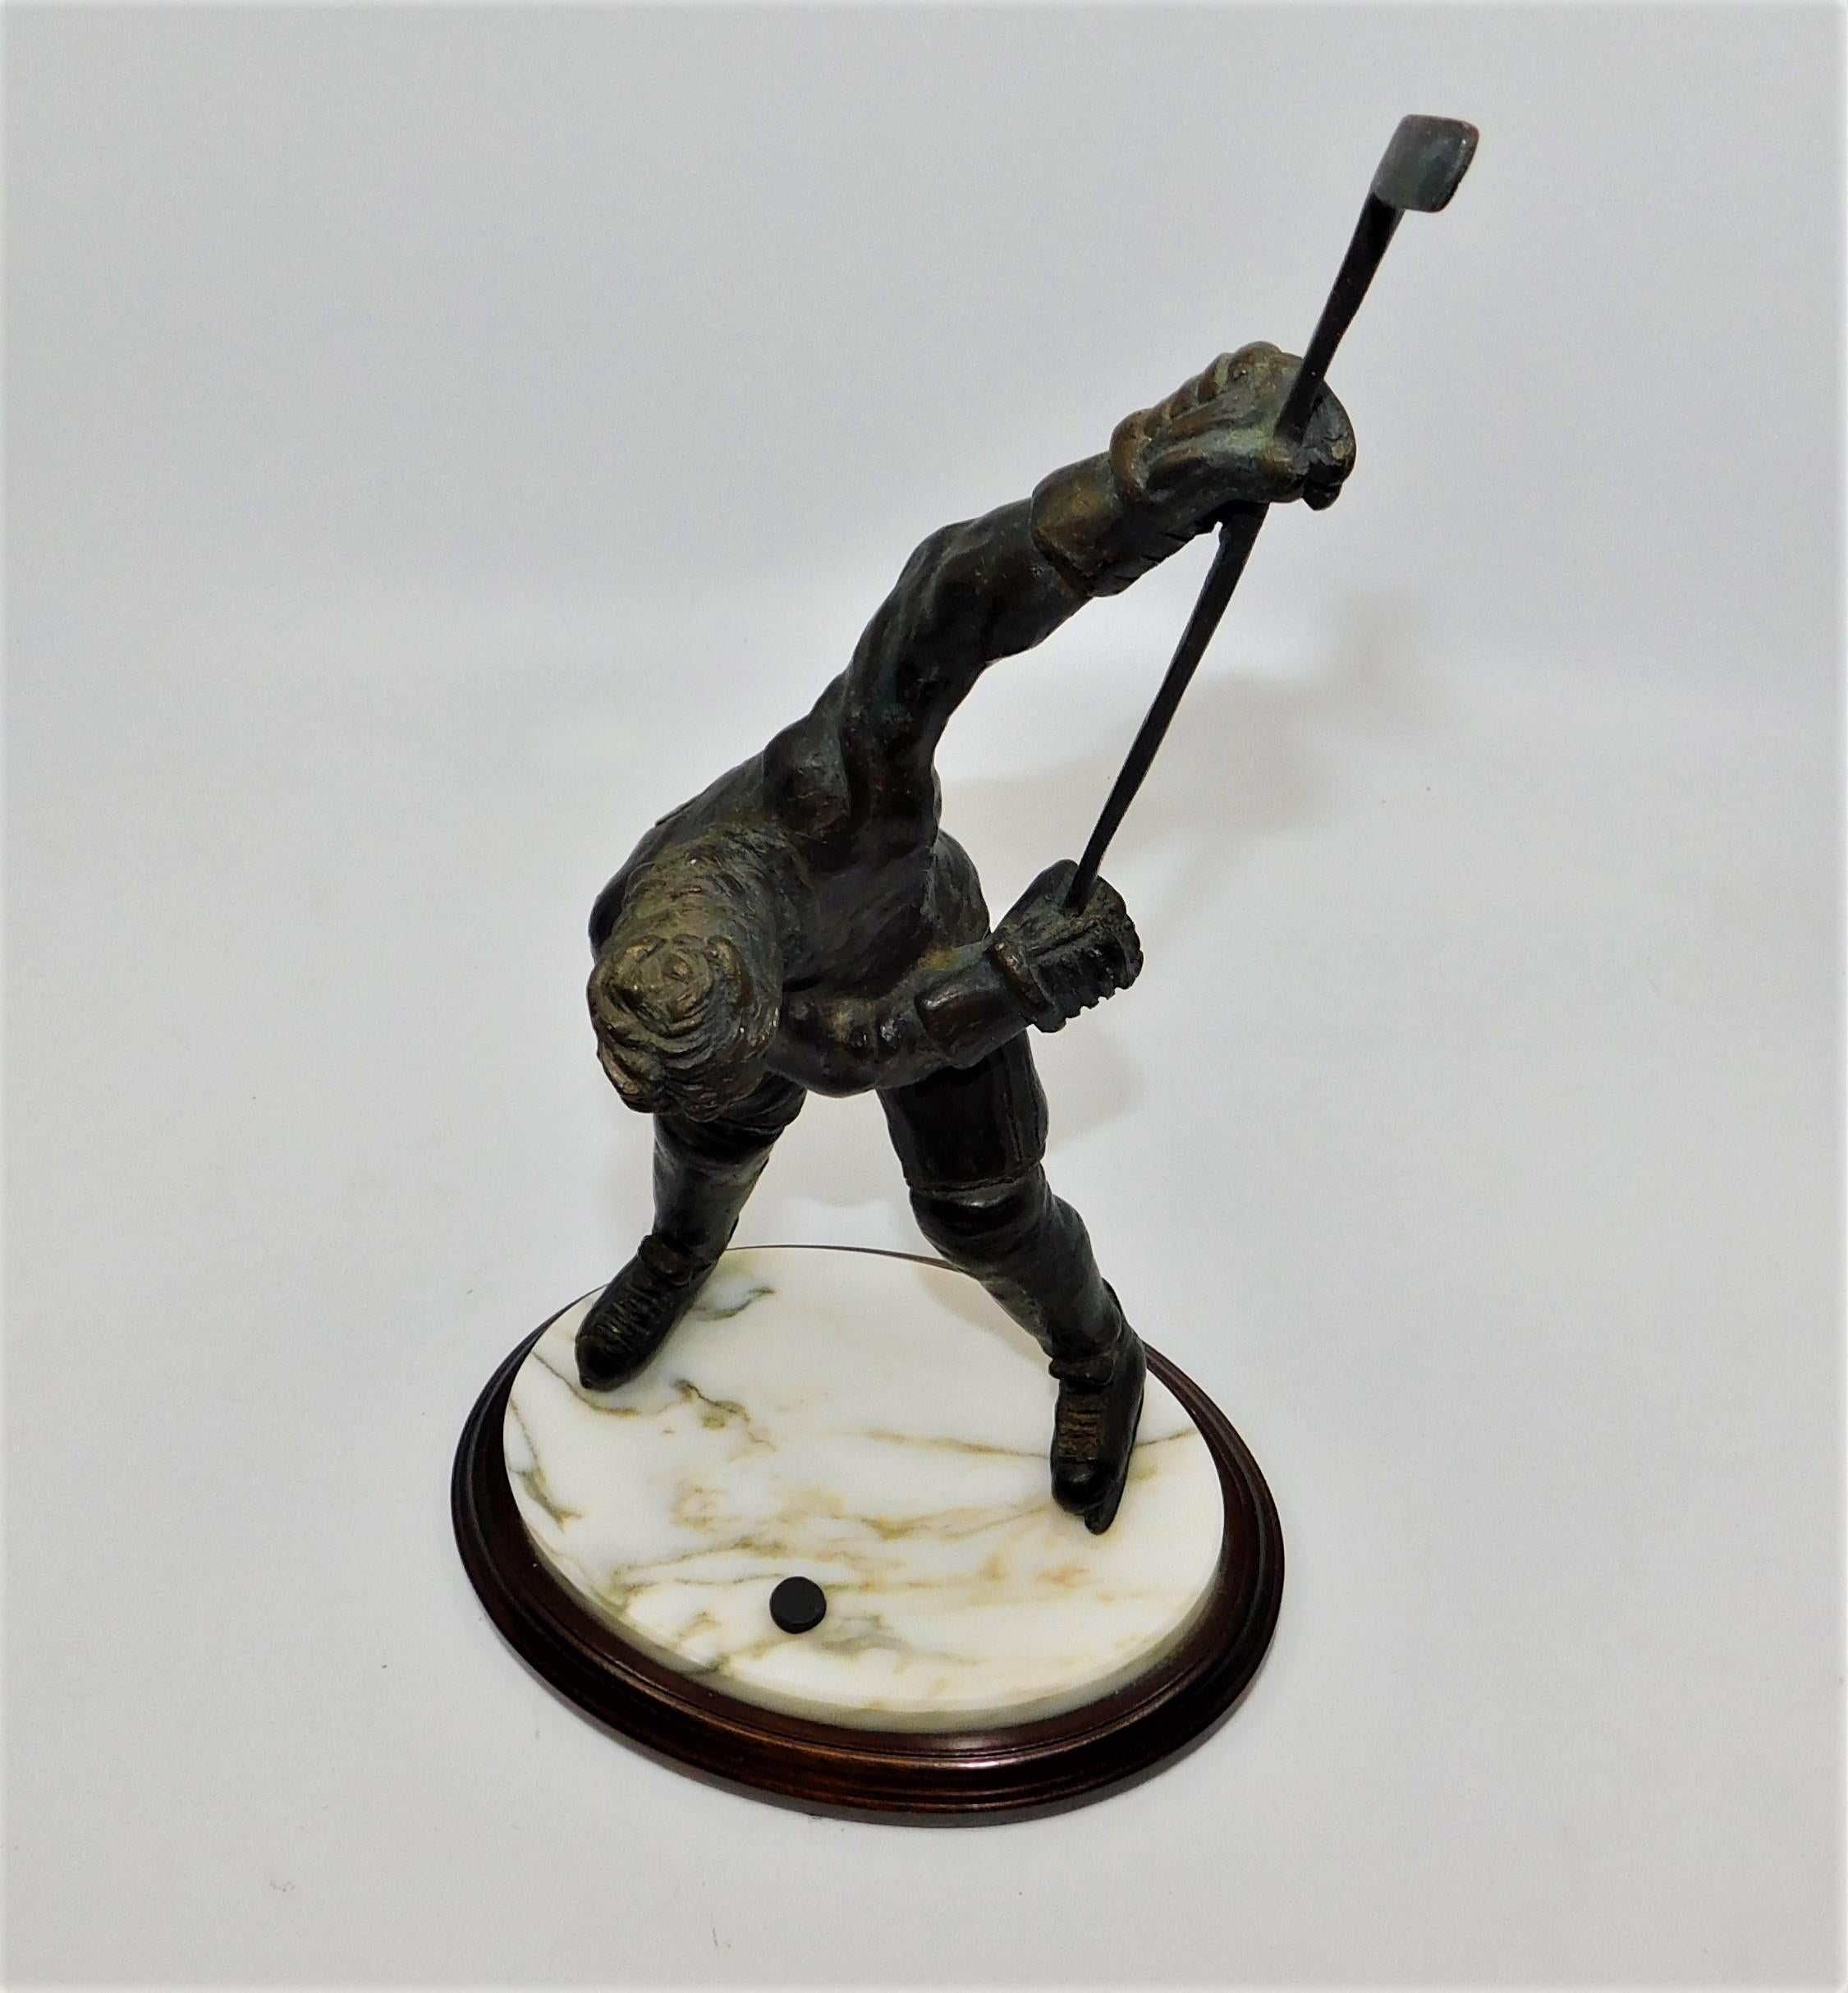 Wayne Gretzky 1985 Limited-Edition Hand Sculpted Bronze Statue #20/200 1